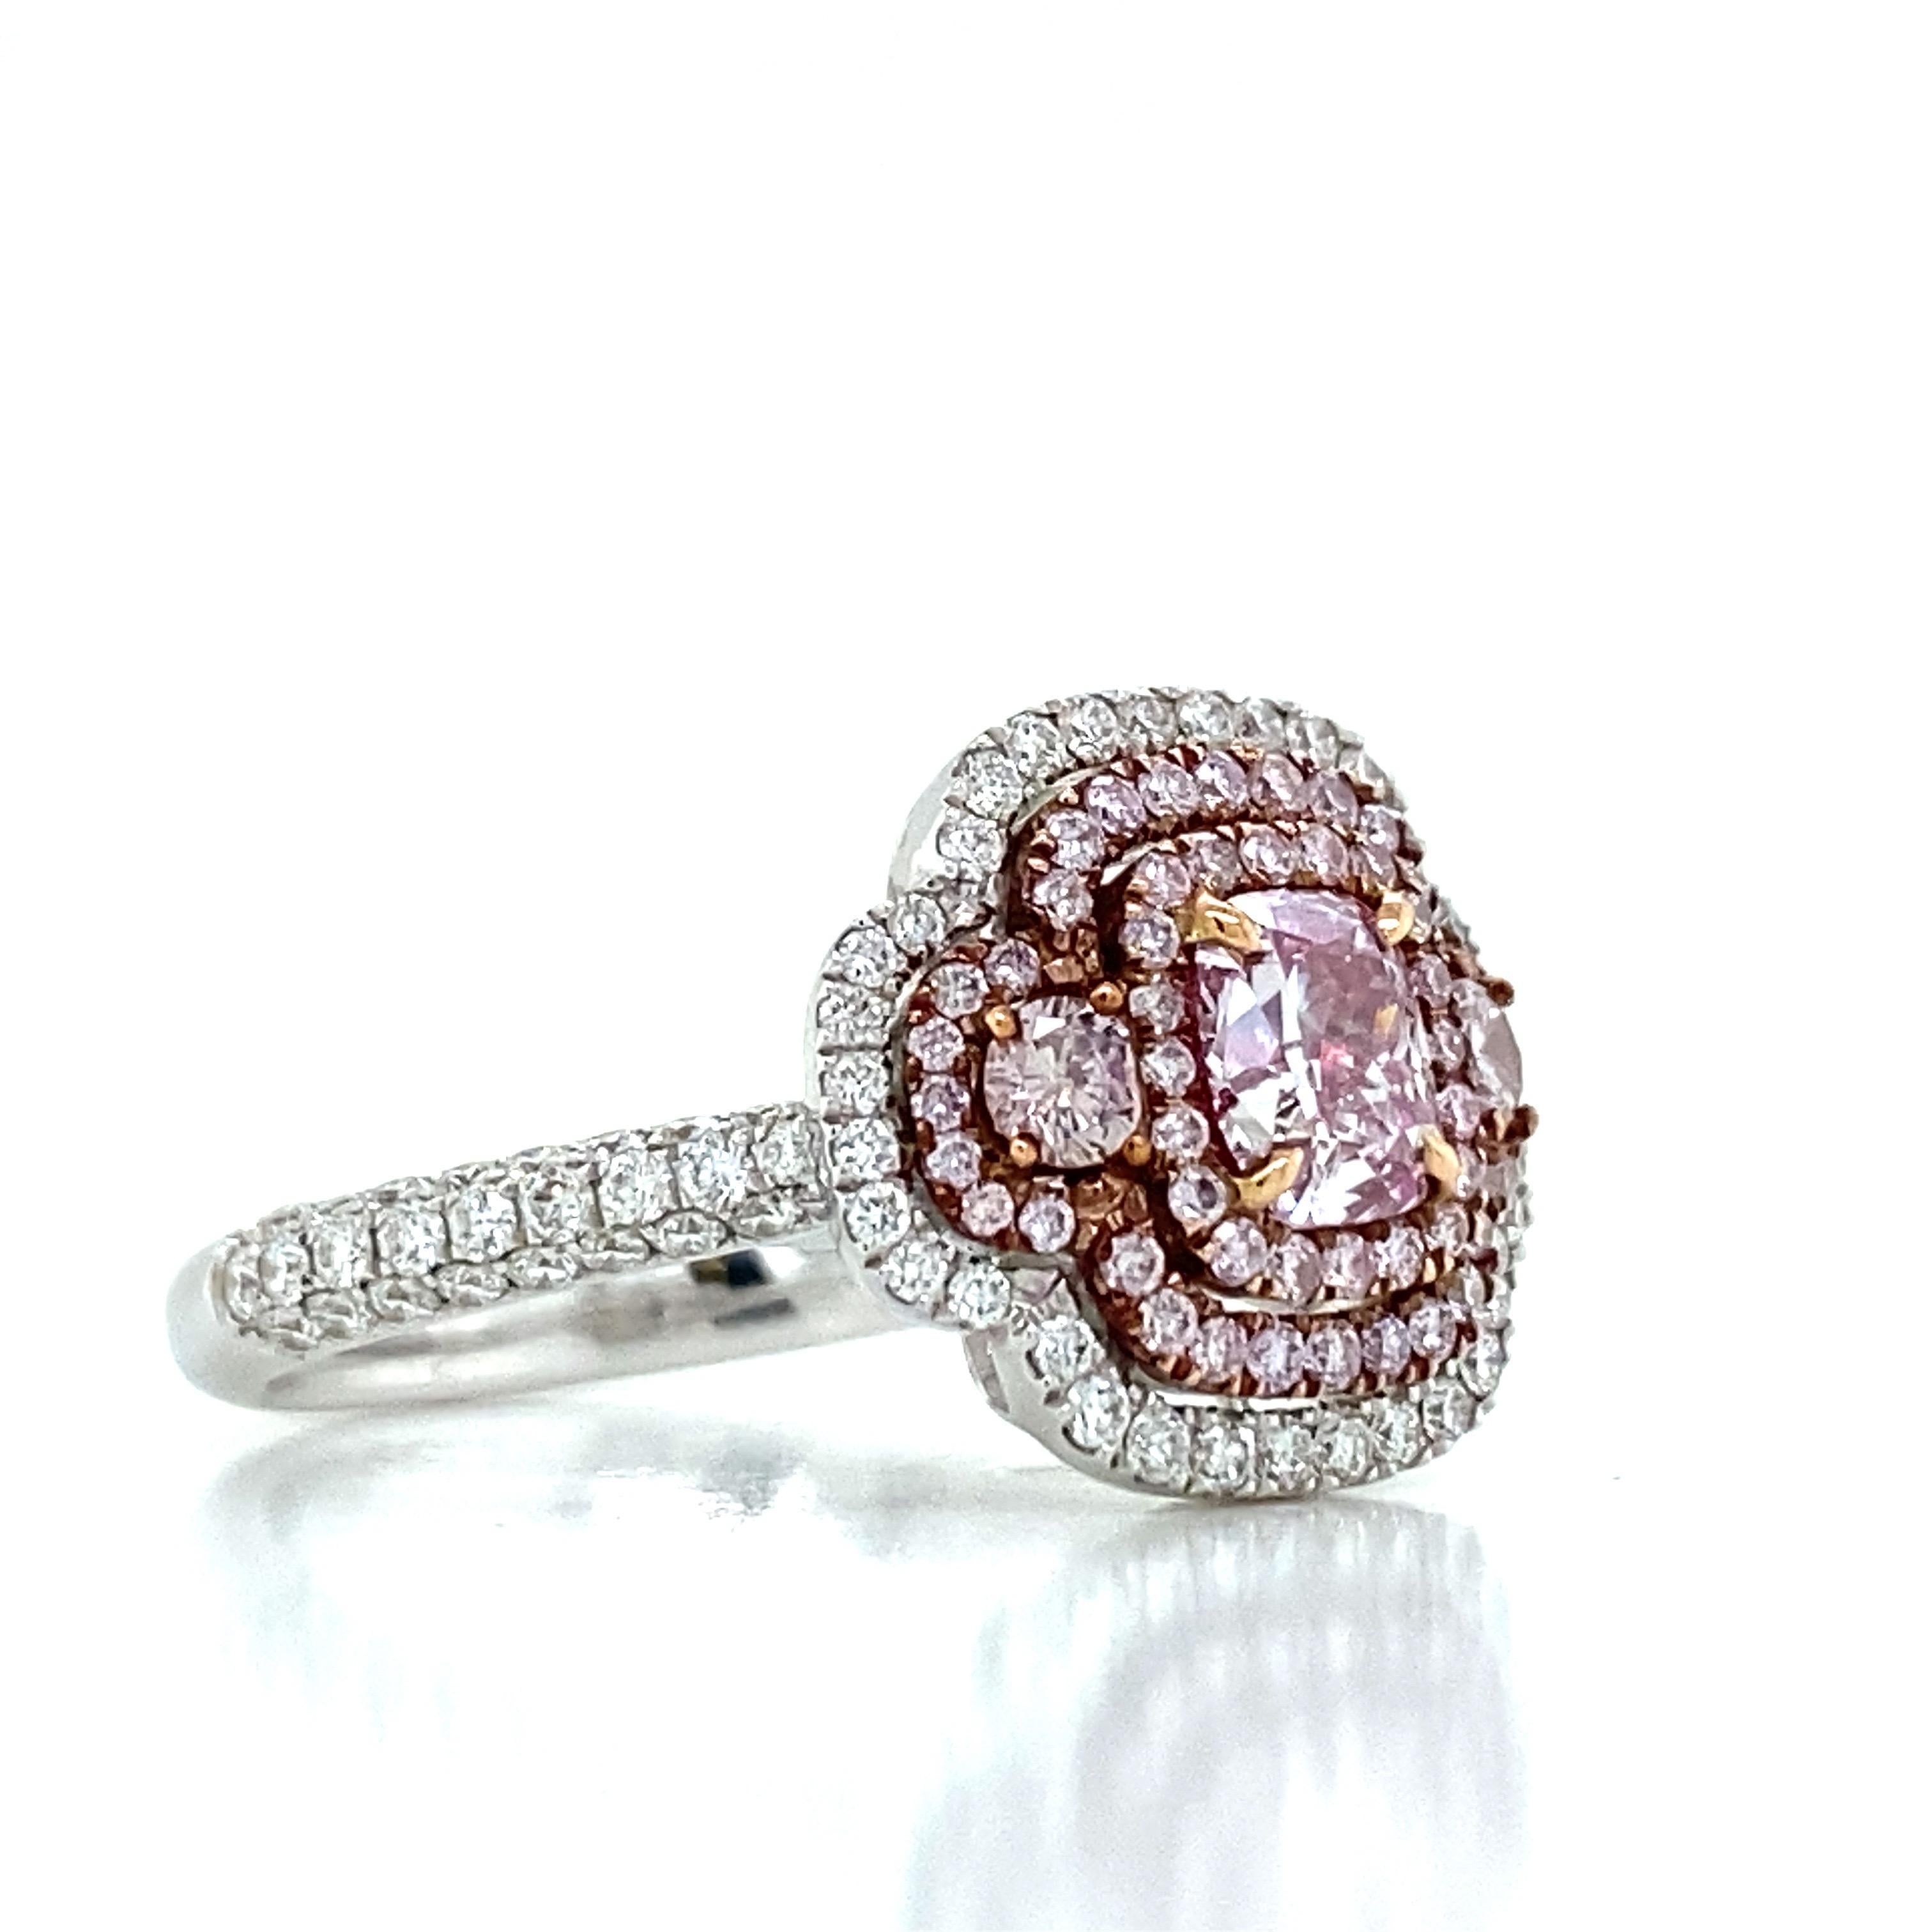 From the Vault at Emilio Jewelry Located on New York's iconic 5th Avenue,
Featuring a center diamond Gia certified Natural Very light pink diamond with no overtone .70ct and a clarity of vvs2. Very special hand made ring mounting with additional